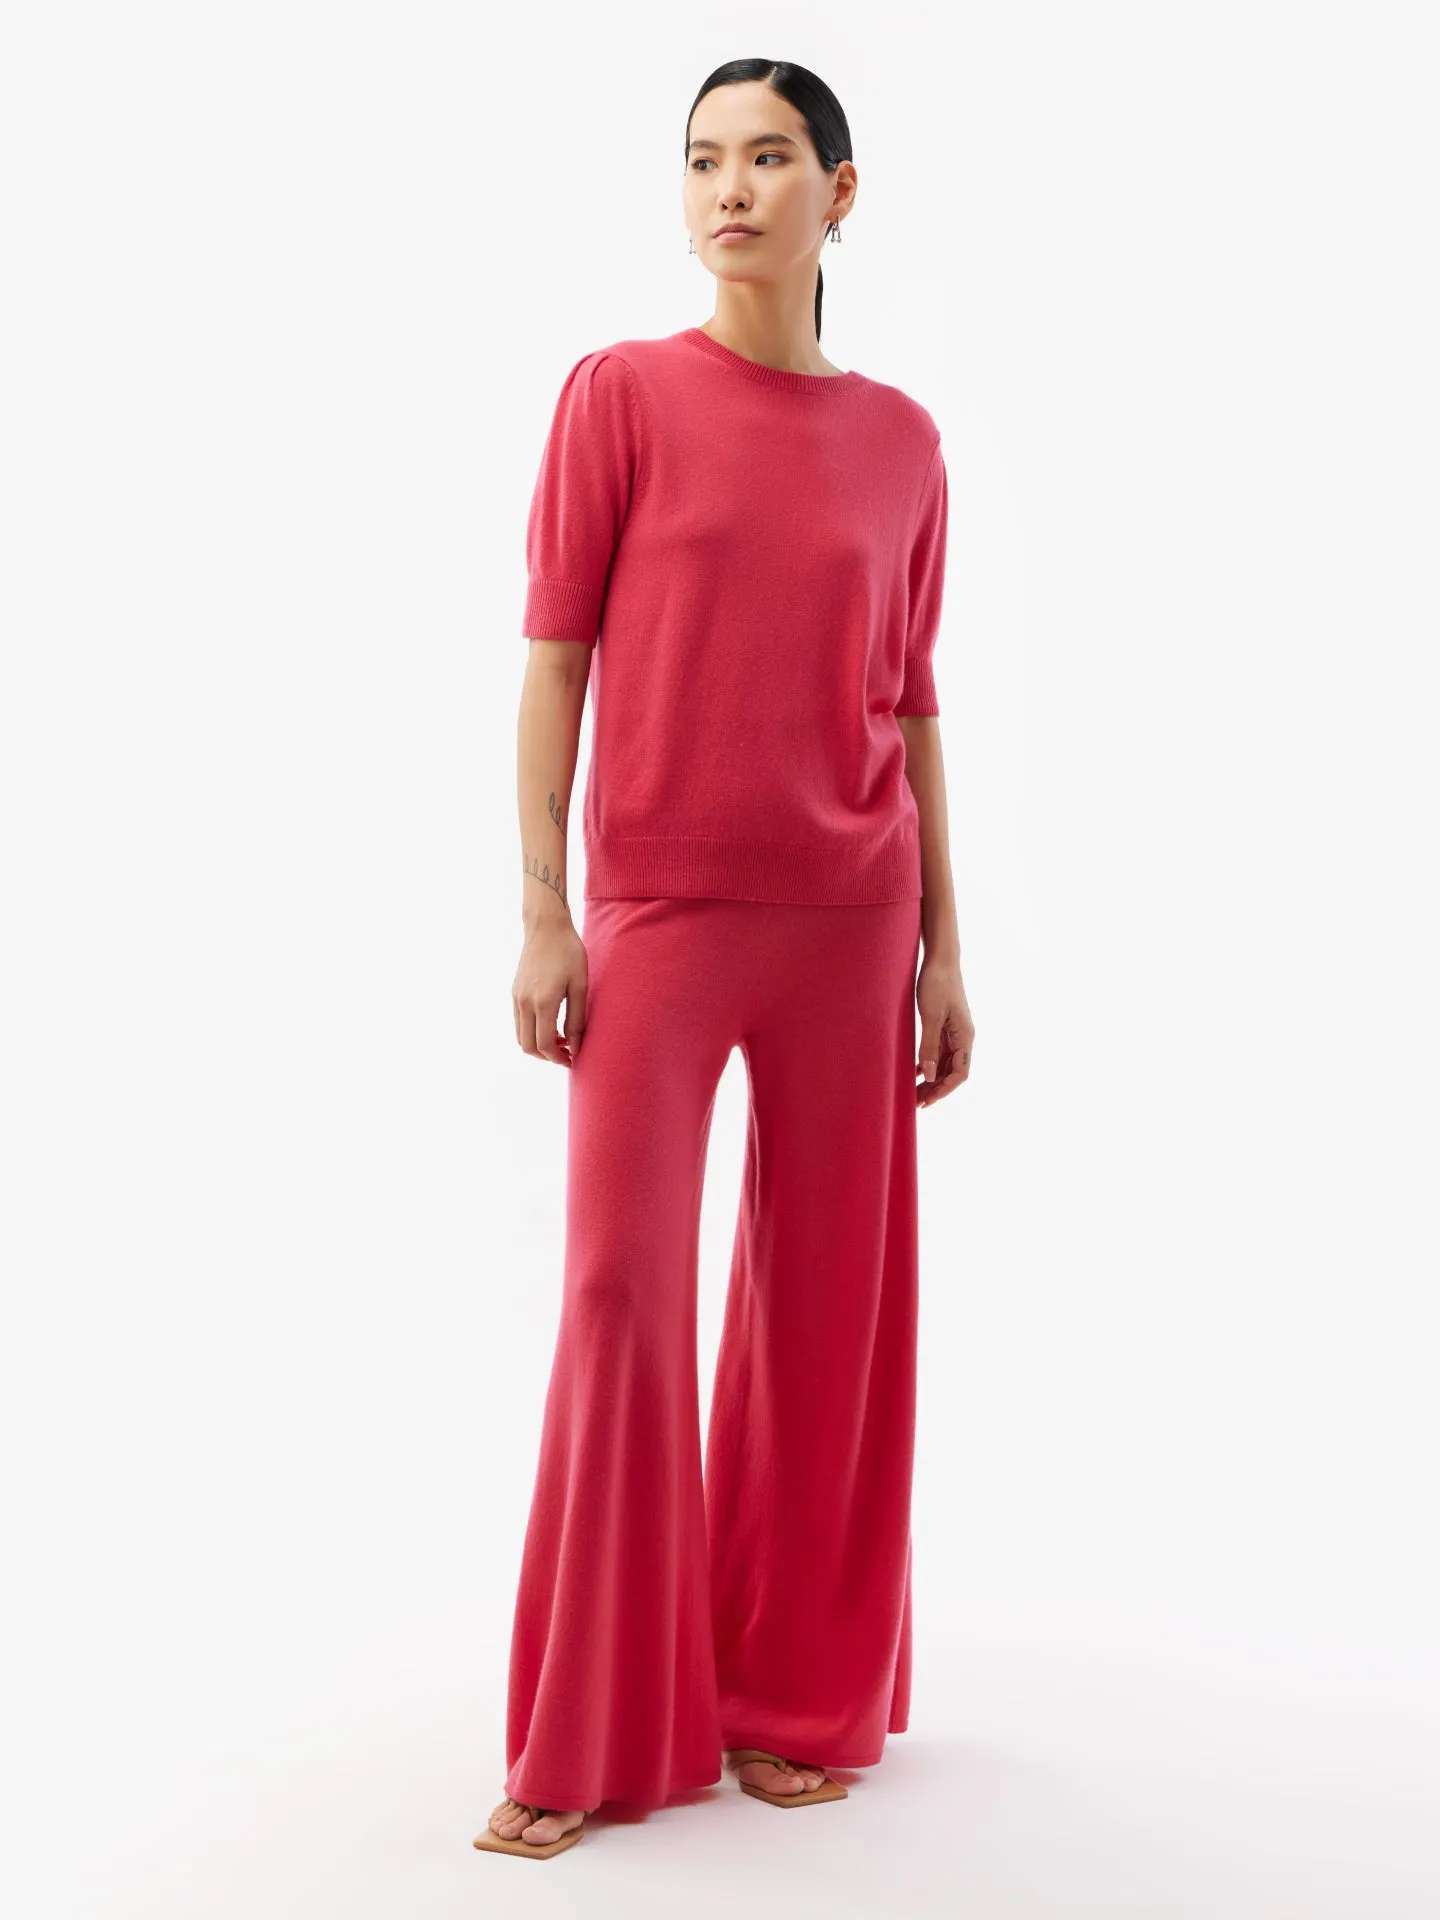 Women's Cashmere Puff Sleeve Top Rose Red - Gobi Cashmere